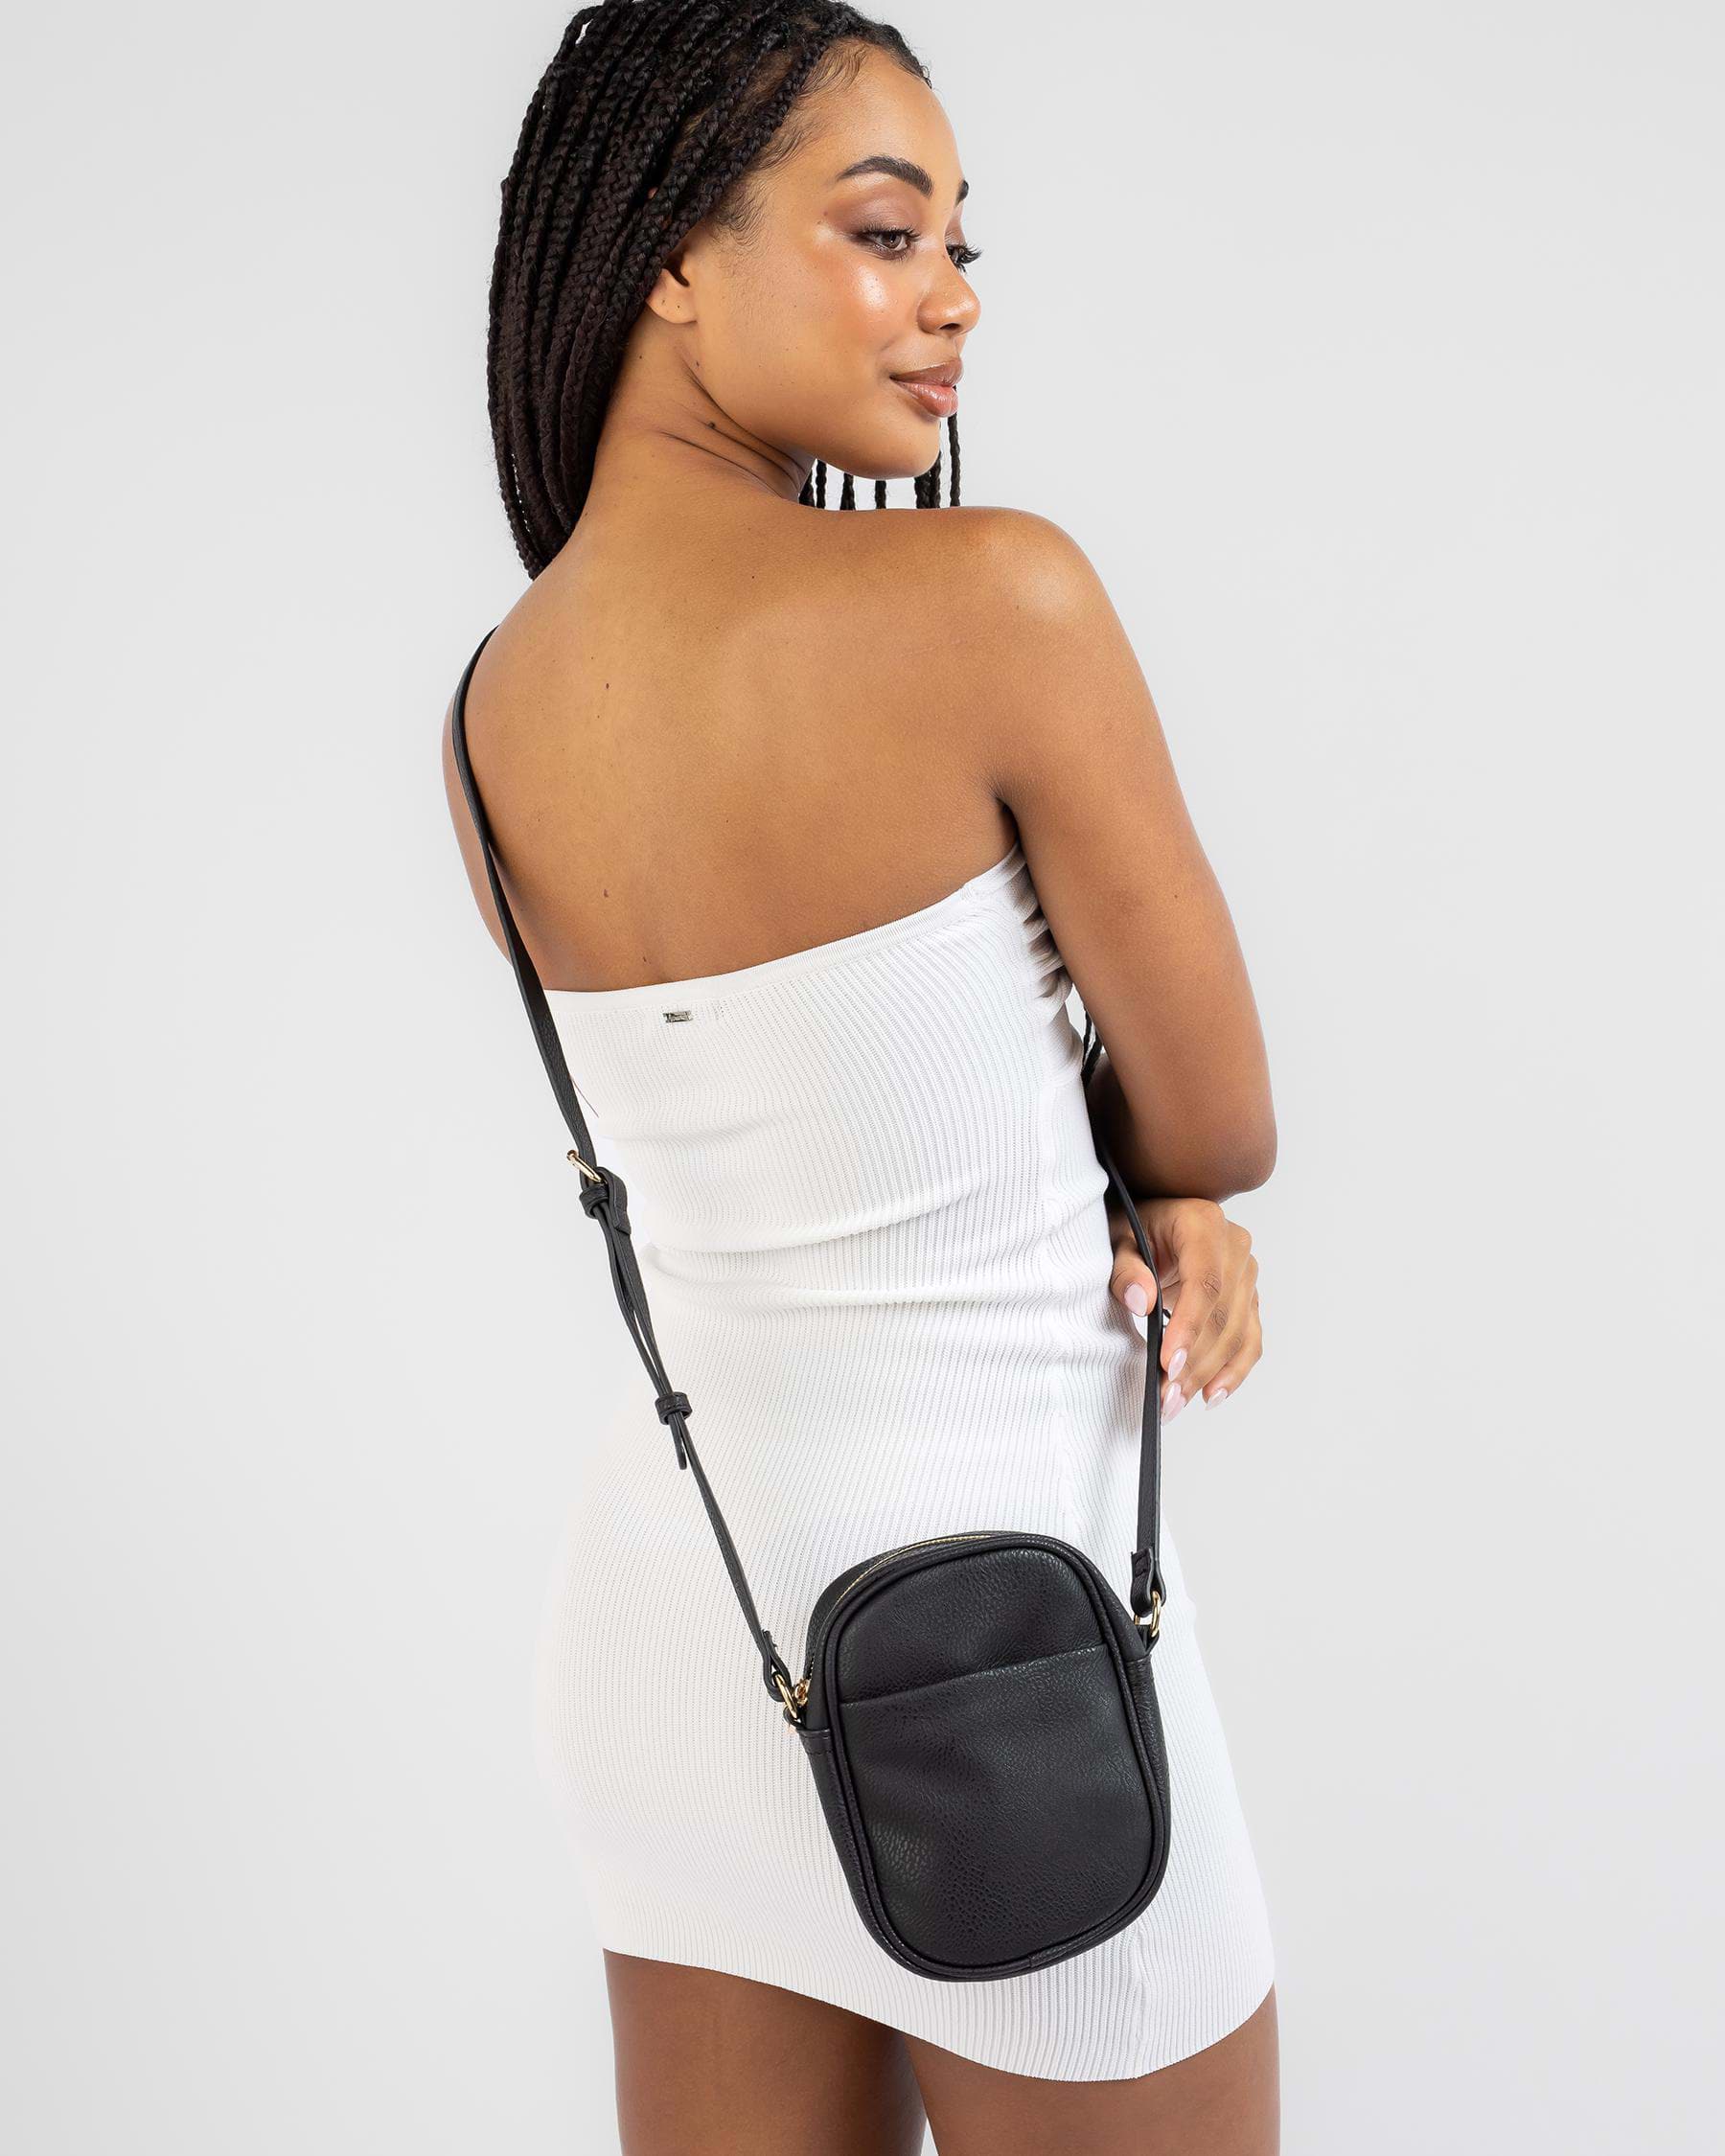 Shop Ava And Ever Krystal Crossbody Bag In Black - Fast Shipping & Easy ...